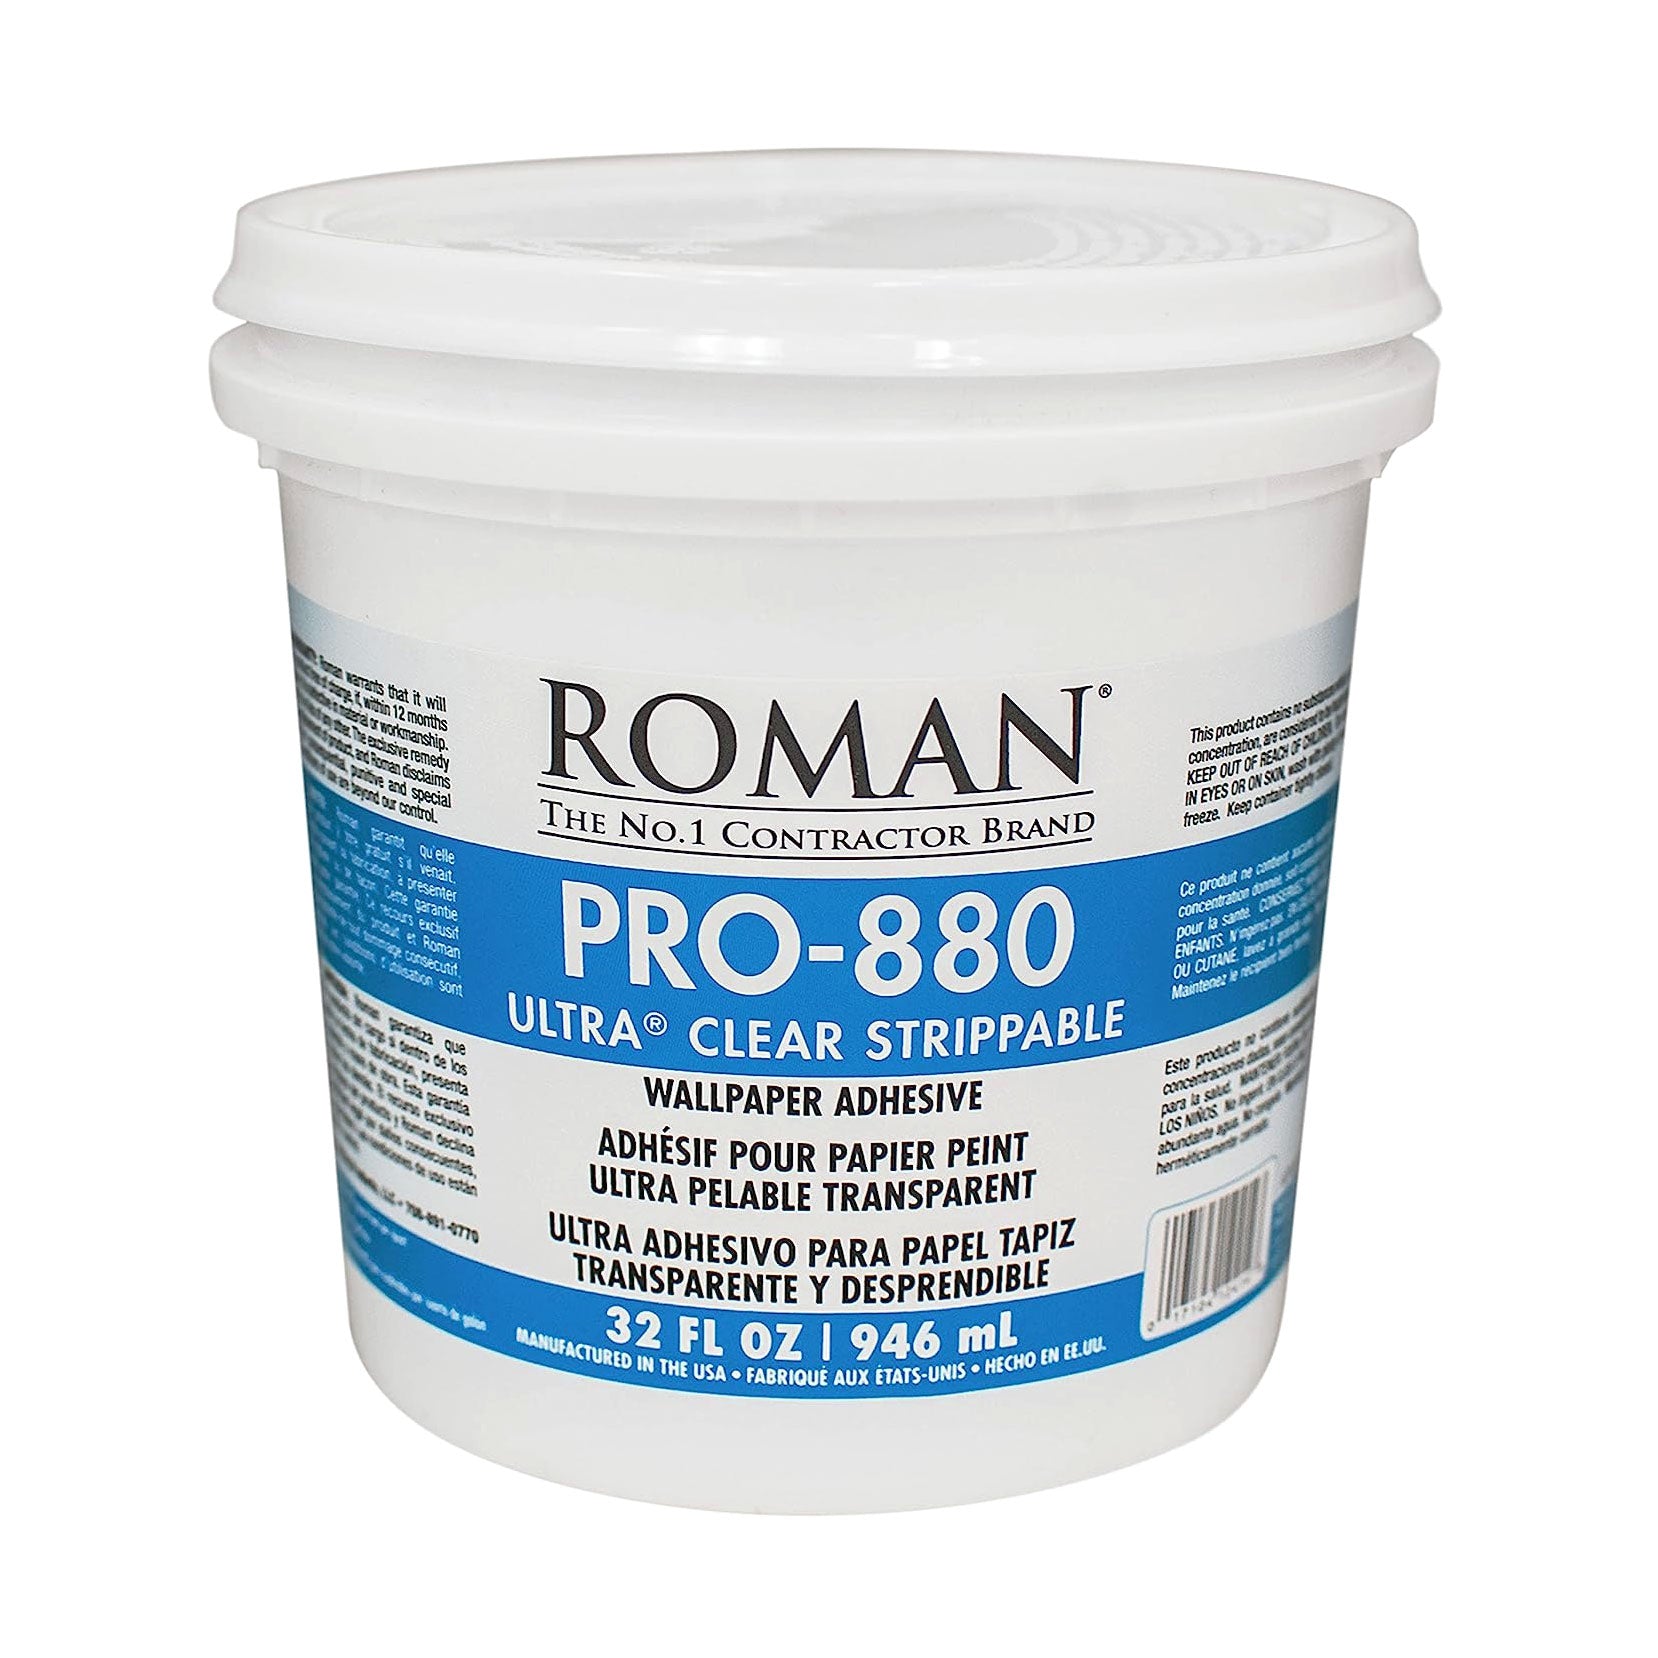 PRO-880 Ultra® Clear Strippable Wallcovering Adhesive - ROMAN Products